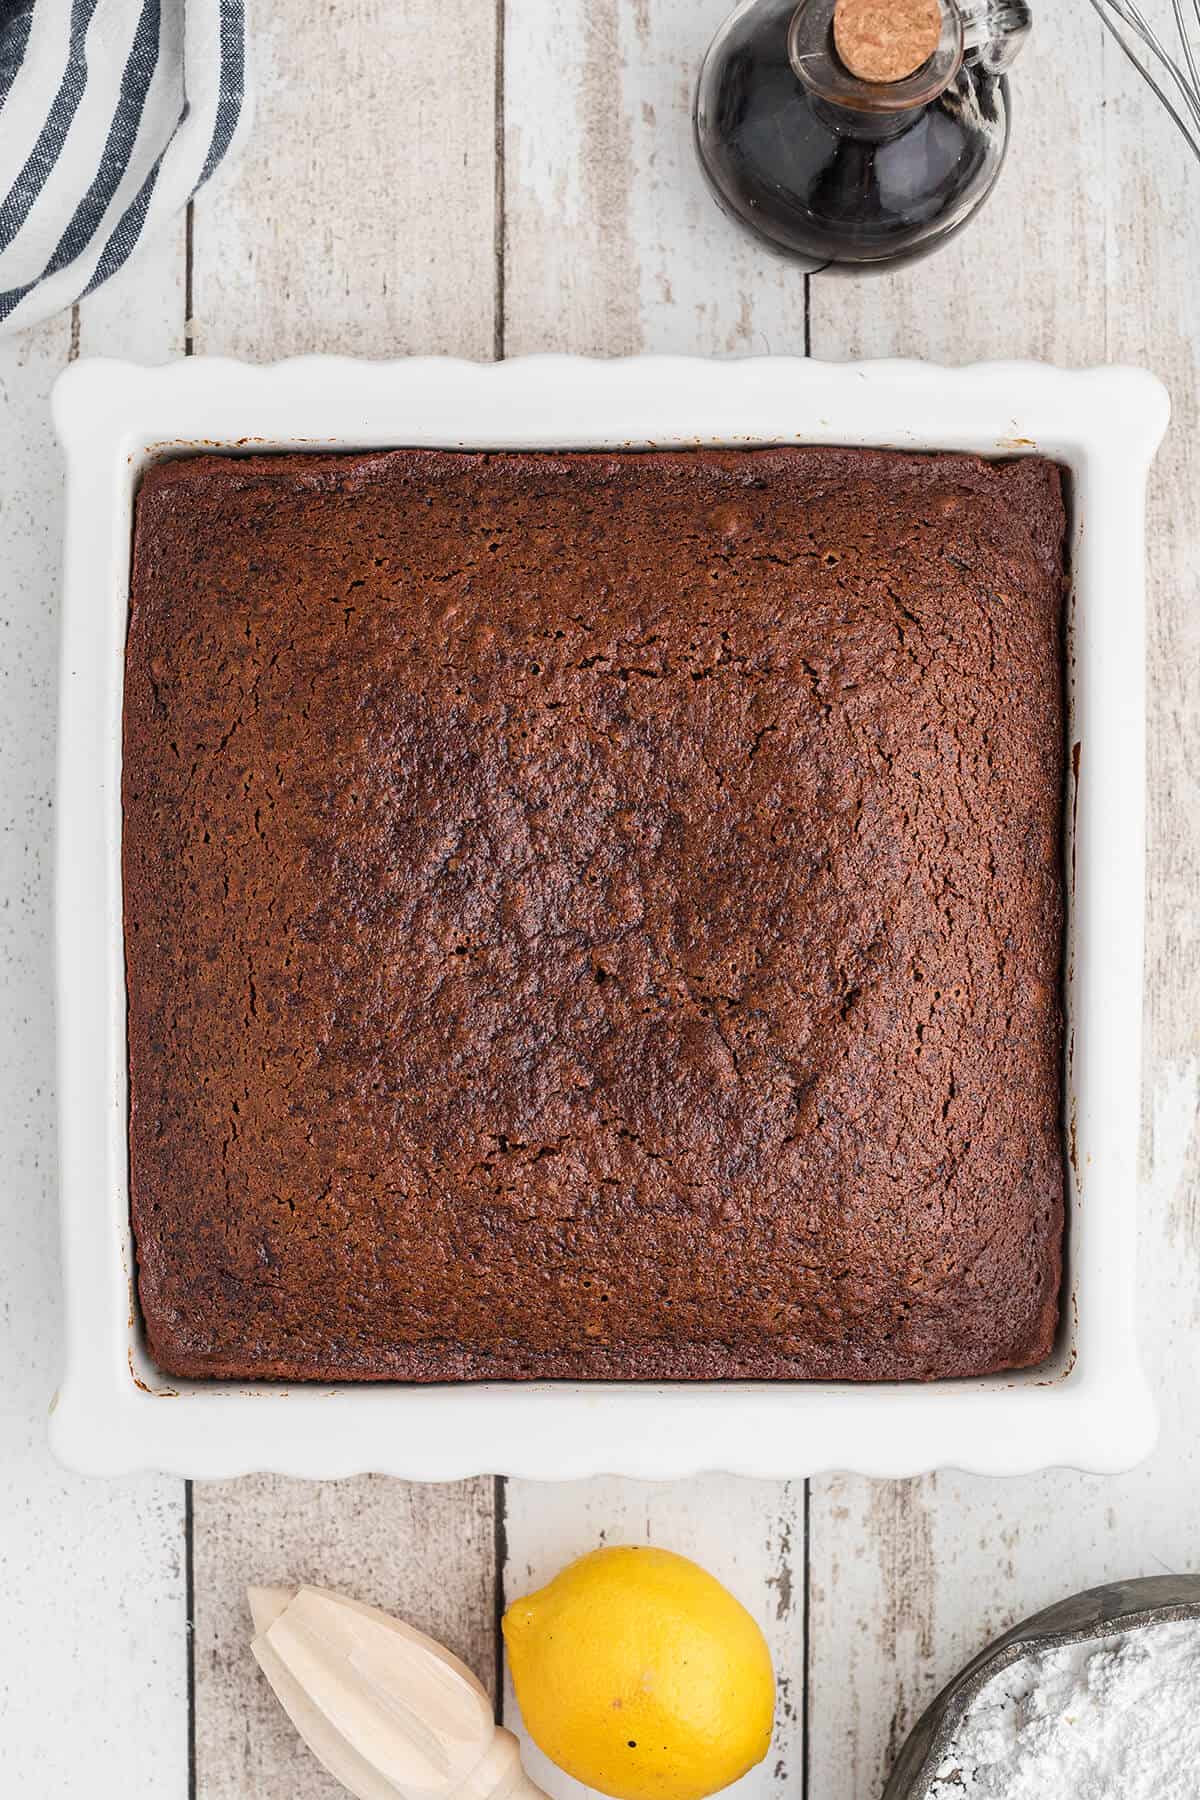 Baked gingerbread in baking dish.